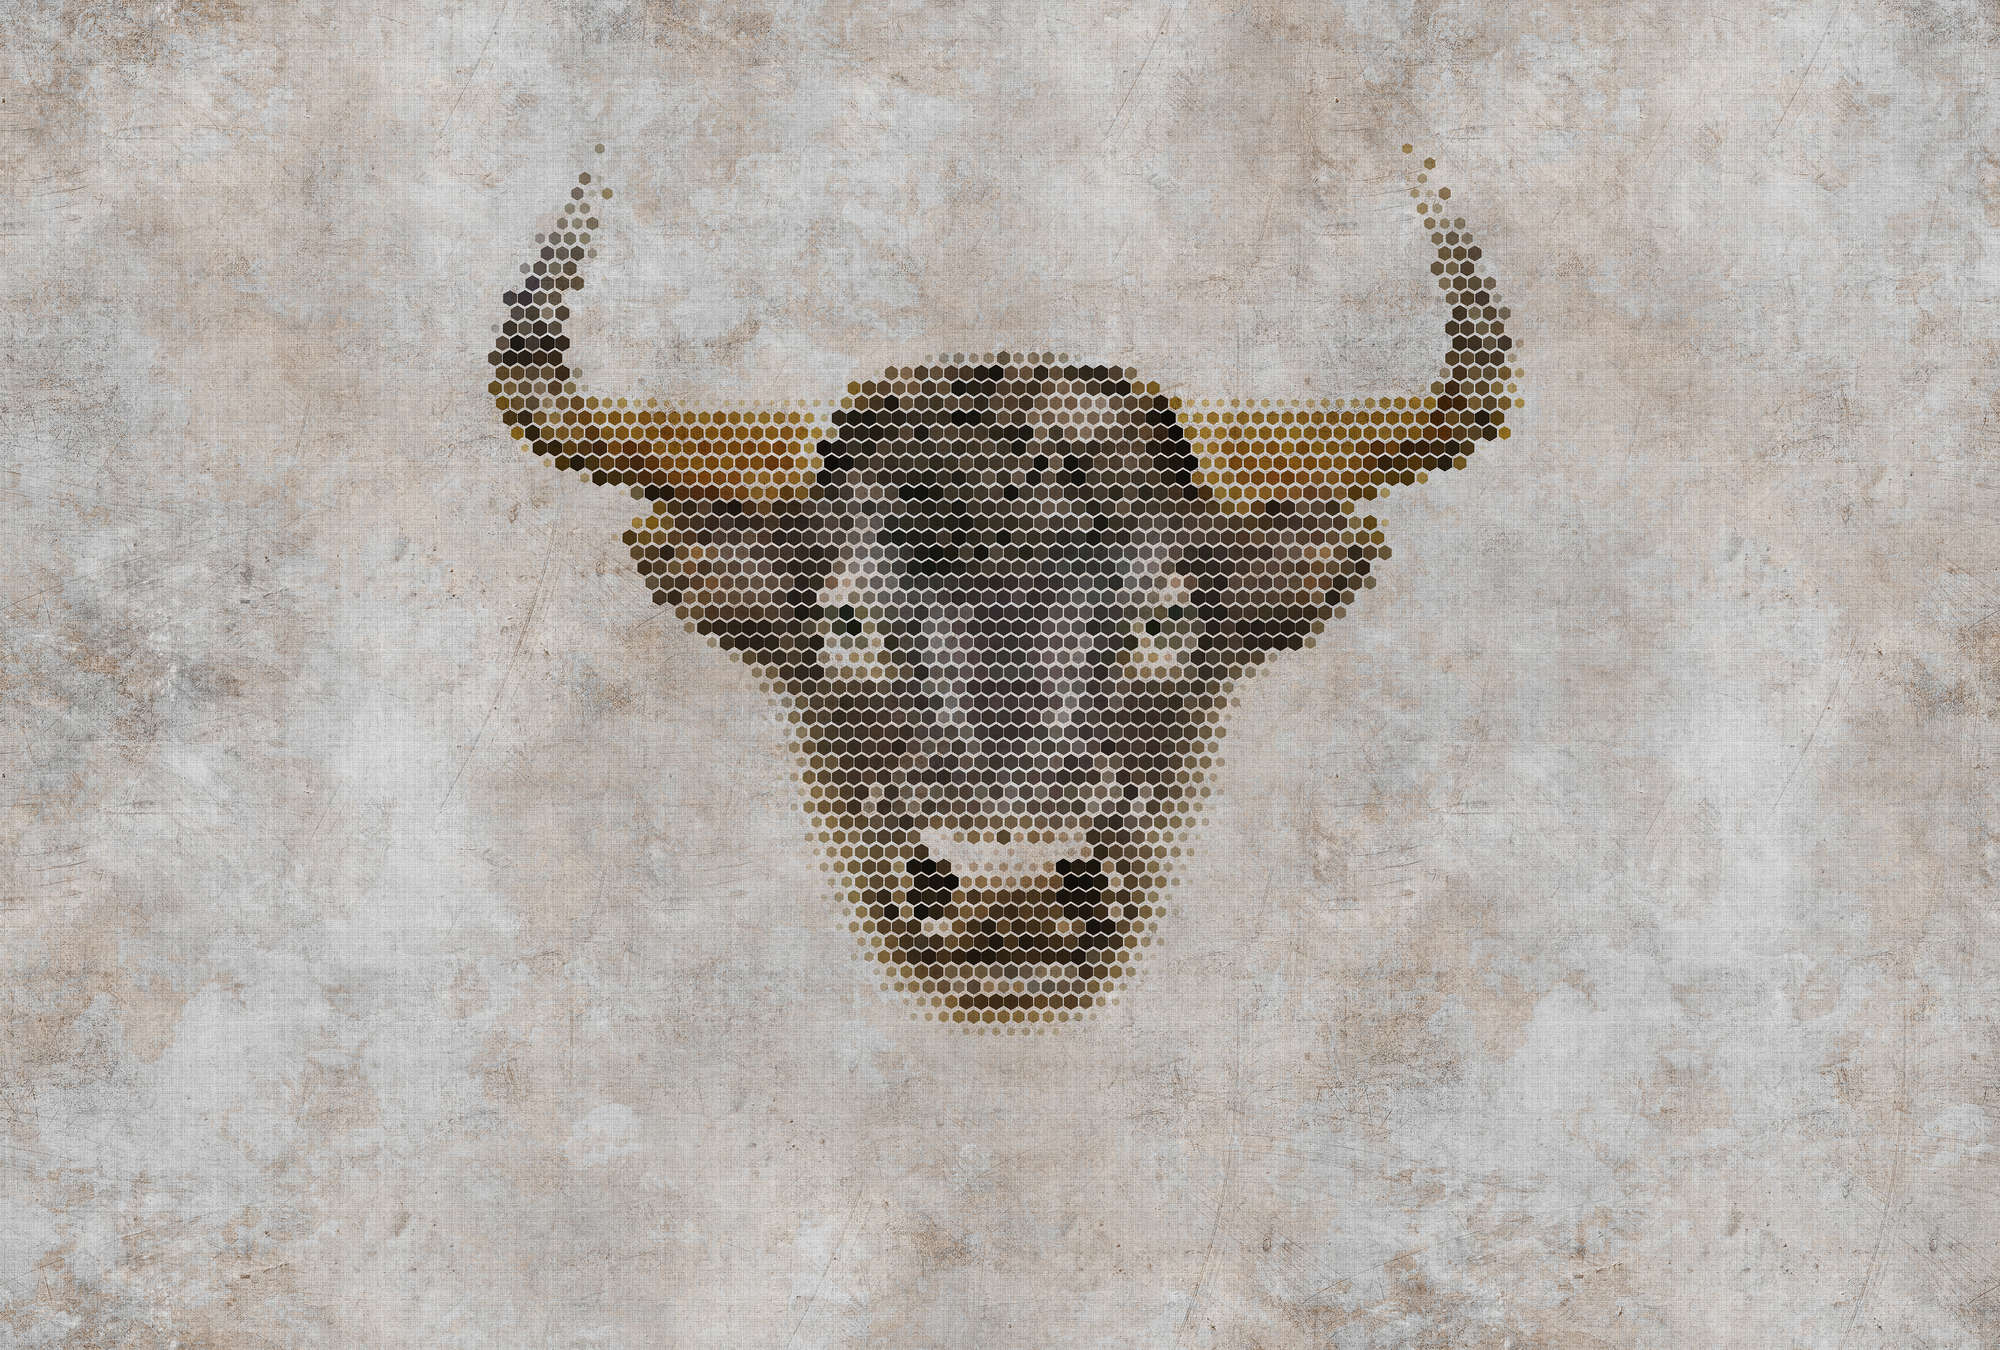             Big three 2 - digital print wallpaper, natural linen structure in concrete look with buffalo - beige, brown | premium smooth non-woven
        